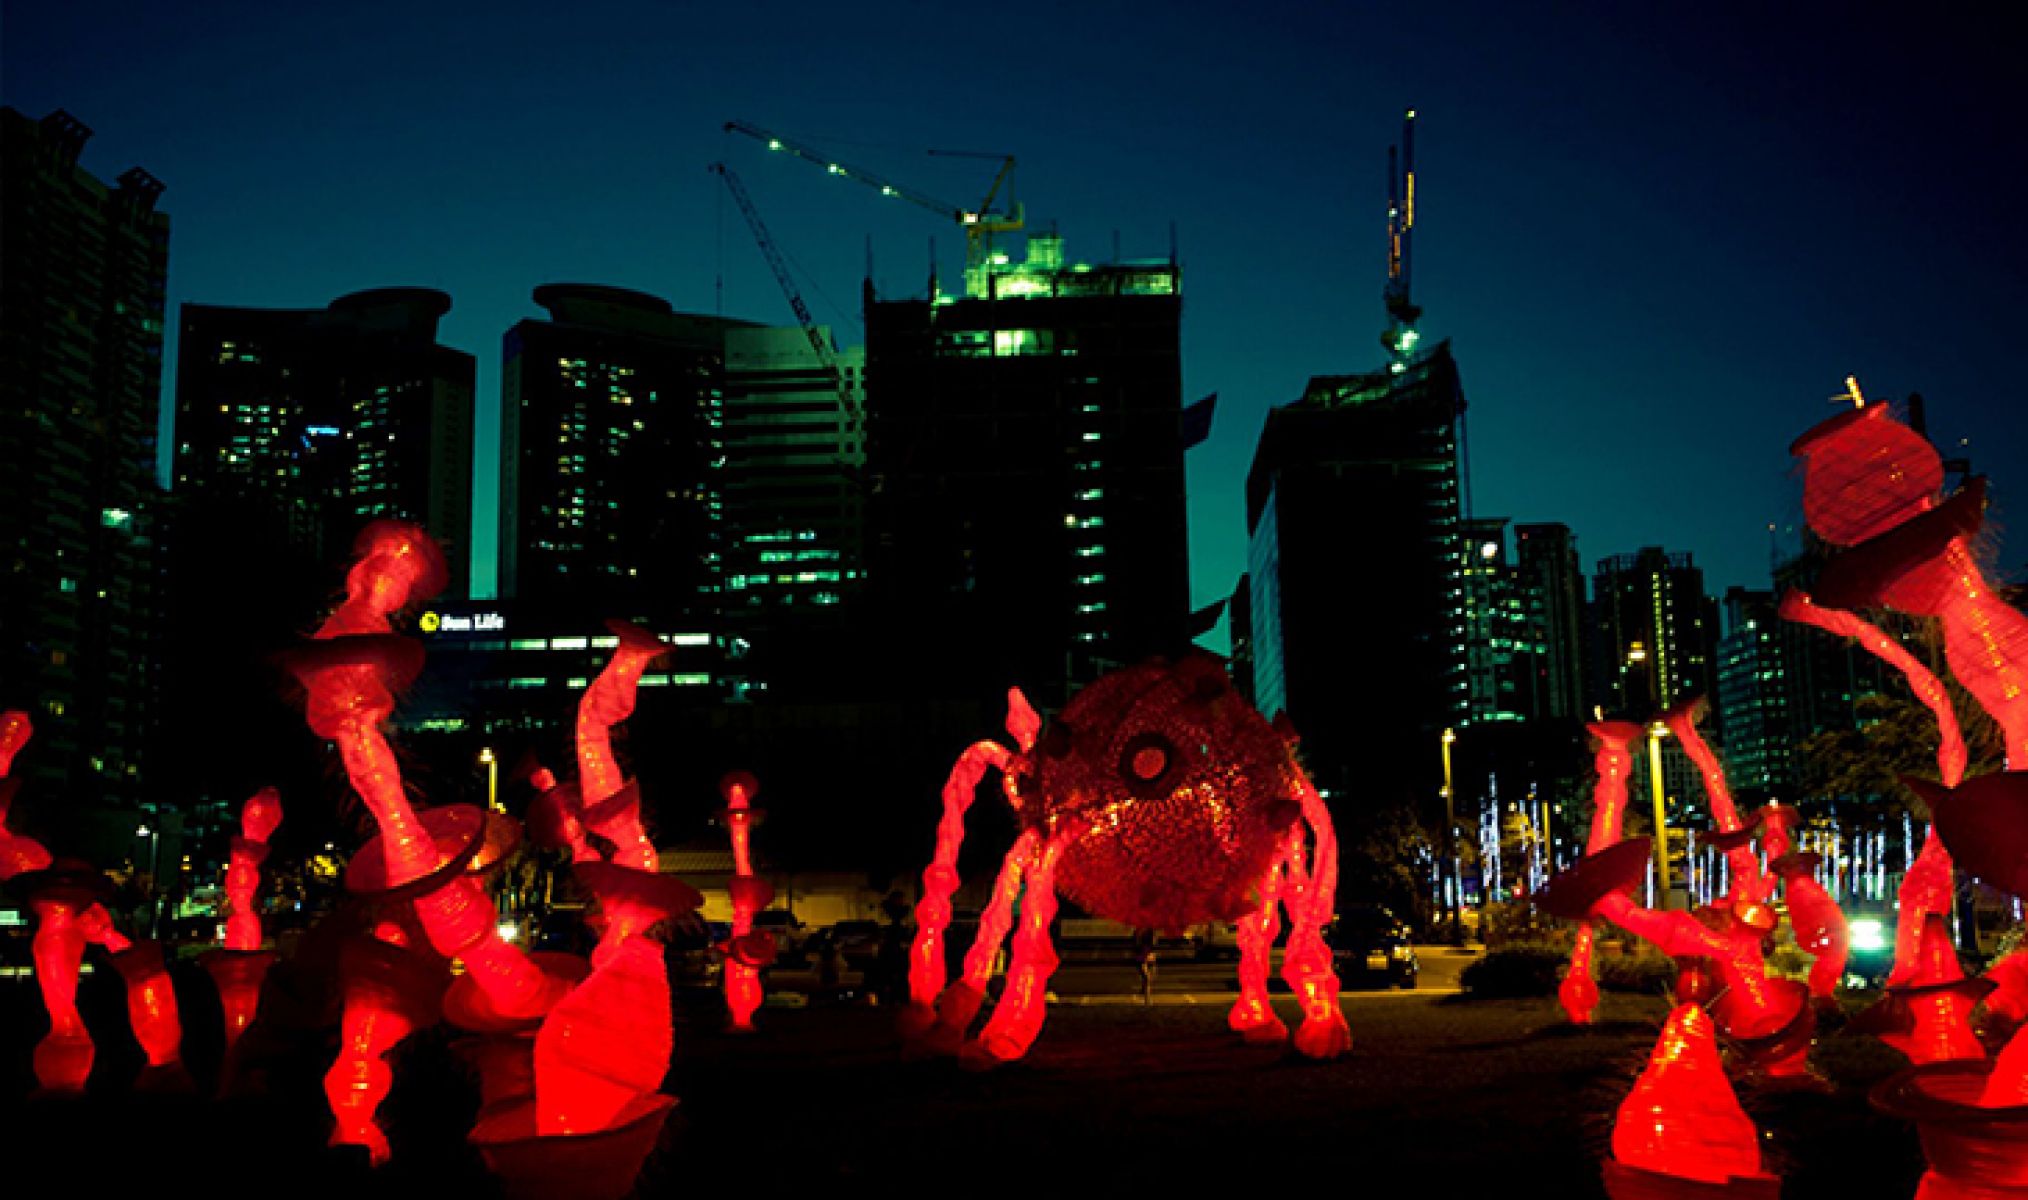 Image shows red illuminated creatures in front of Melbourne city buildings at night time